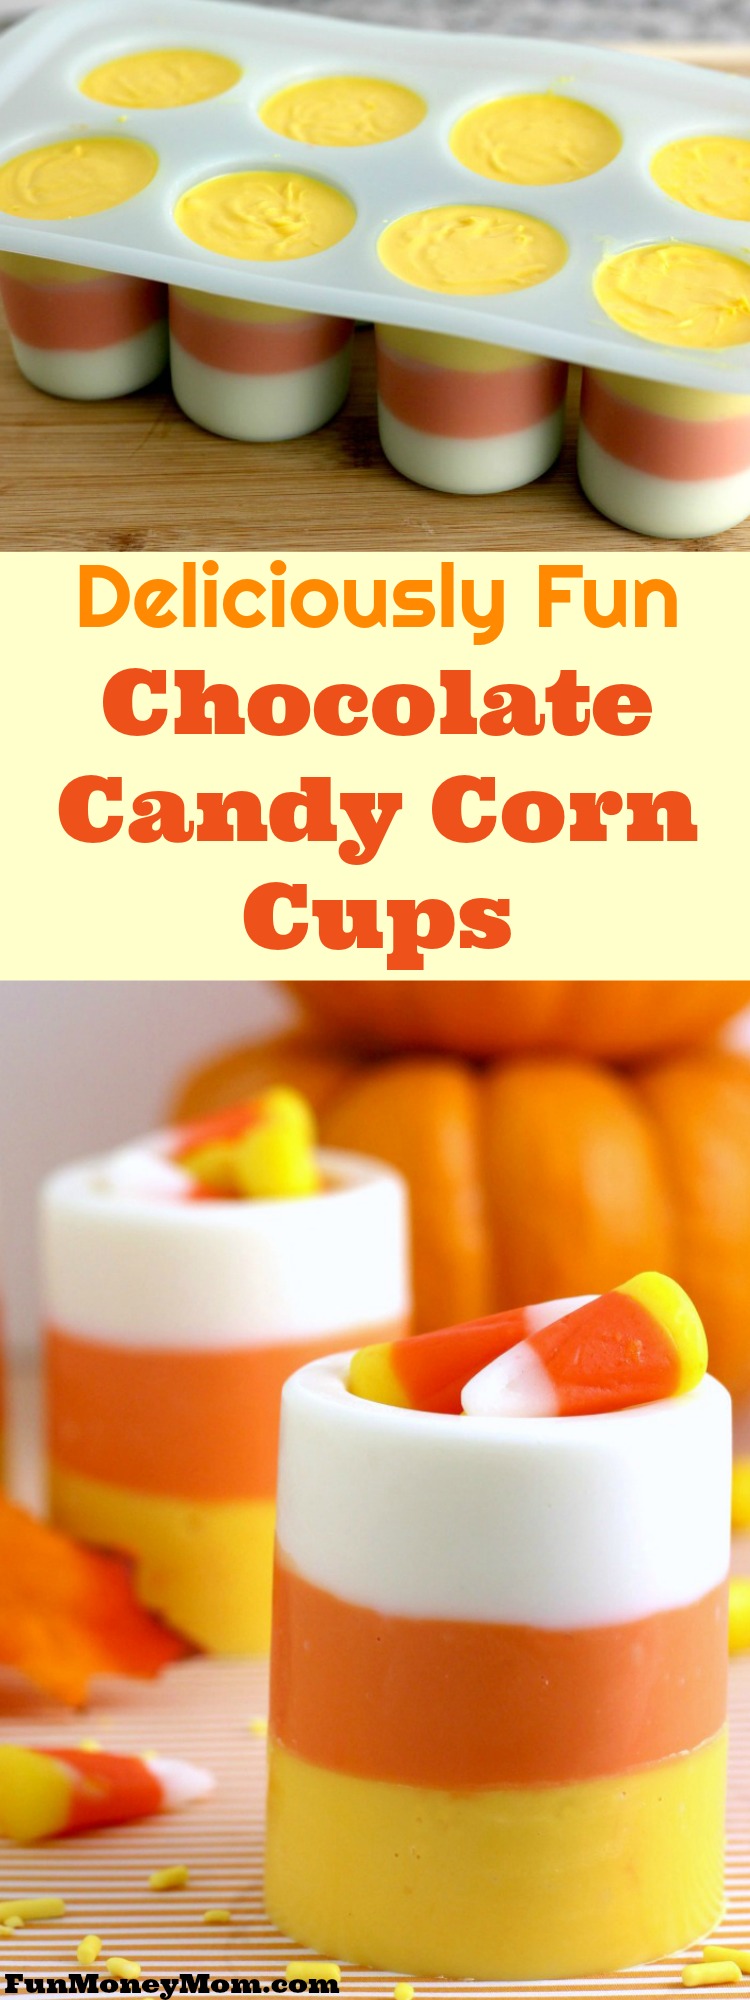 Why not treat your friends for Halloween? These chocolate candy corn cups make a delicious Halloween dessert that everybody will love!